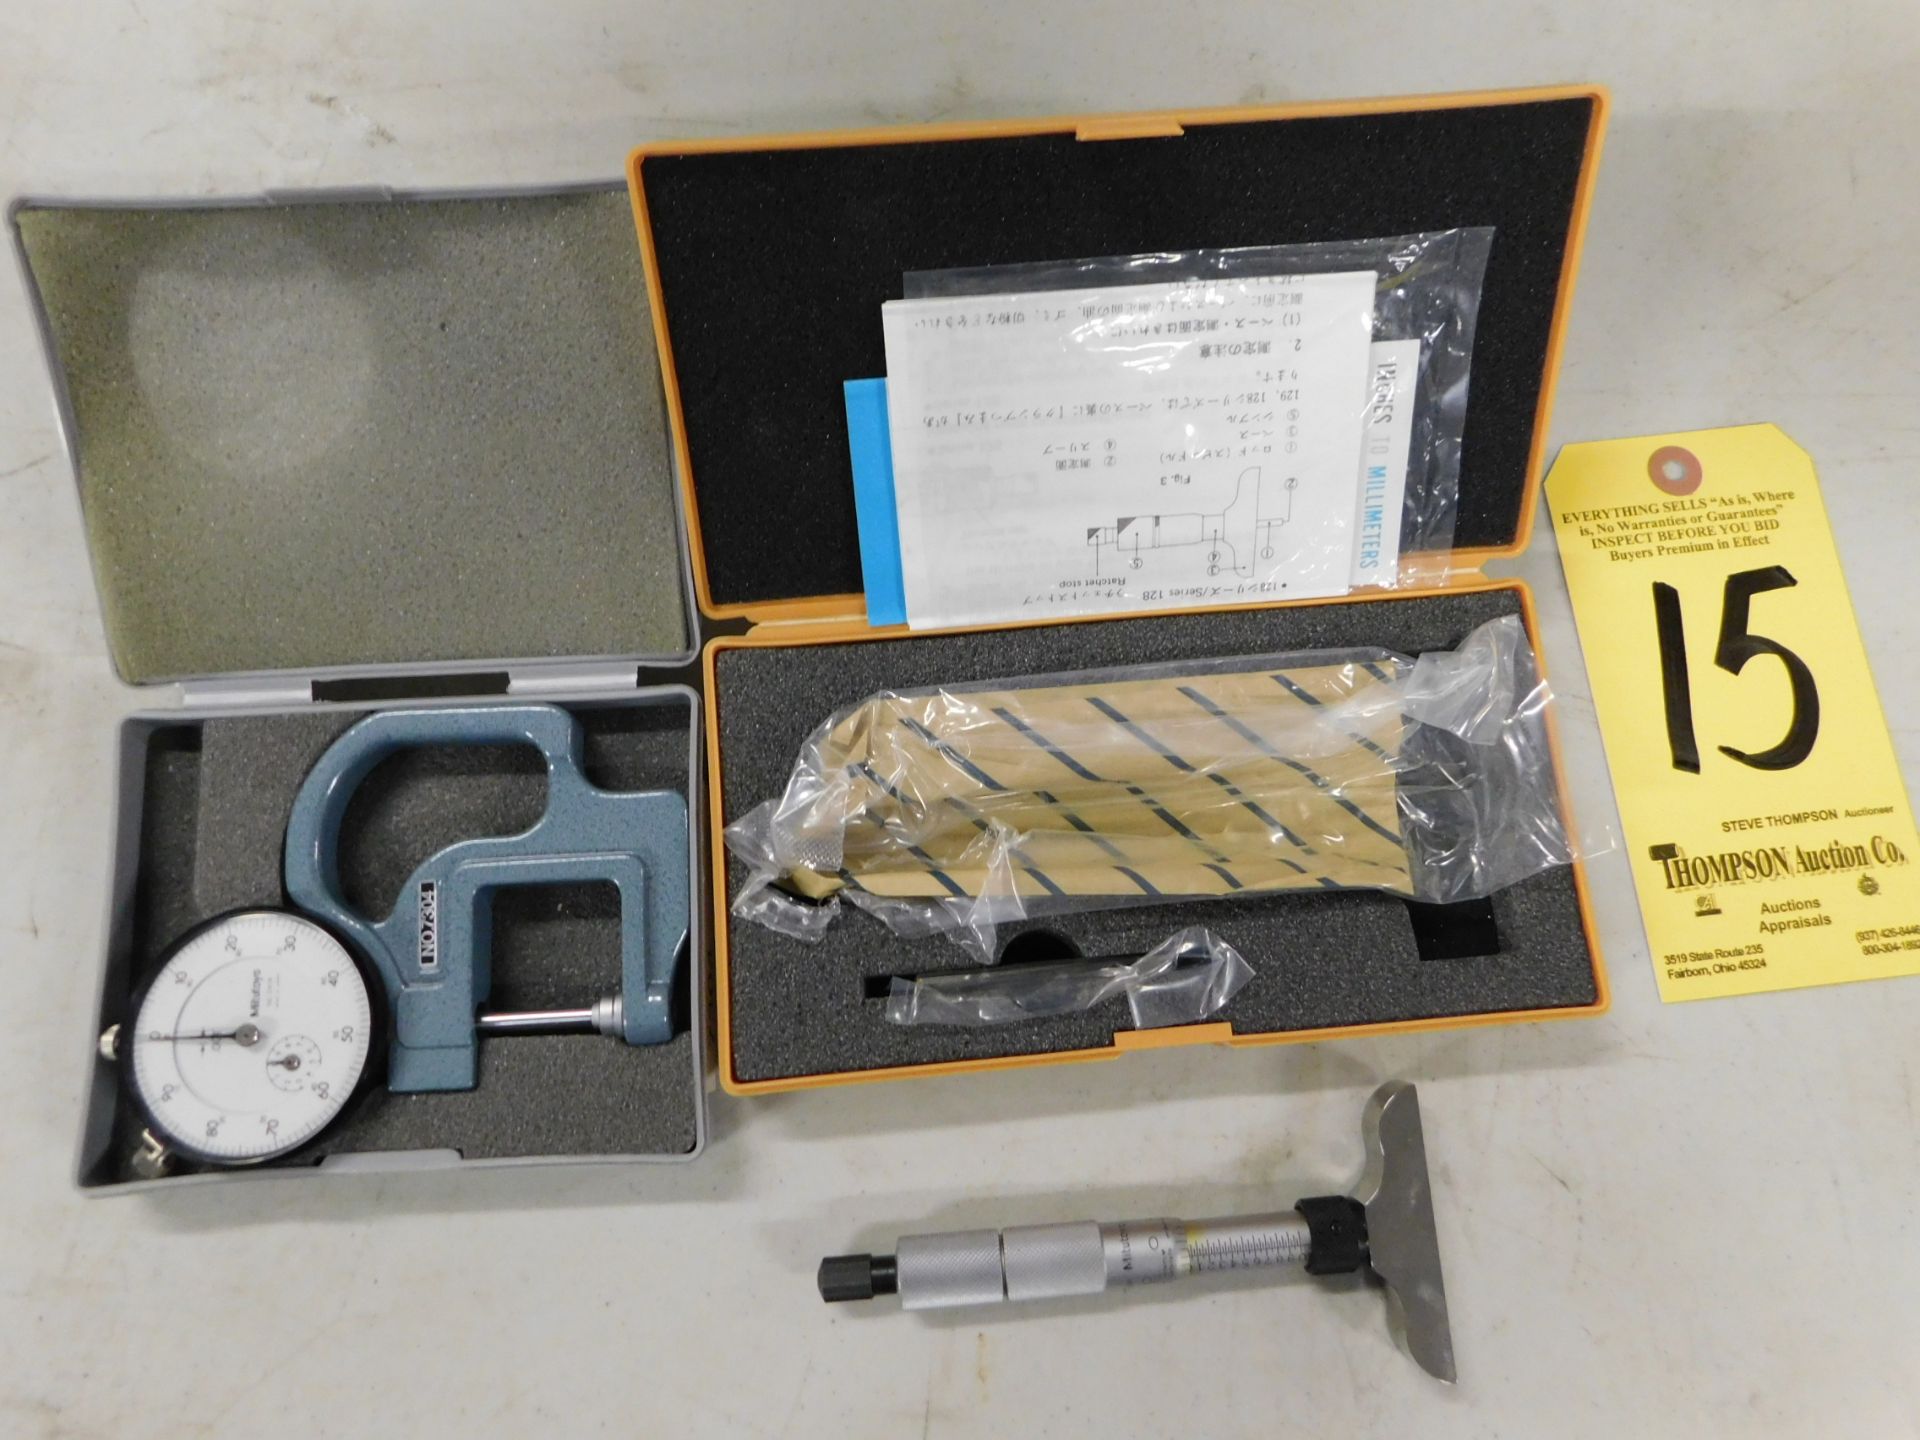 (1) Mitutoyo Dial Thickness Gauge, #7304 Caliper Gage, and (1) Mitutoyo #129-147 Depth Micrometer, 1